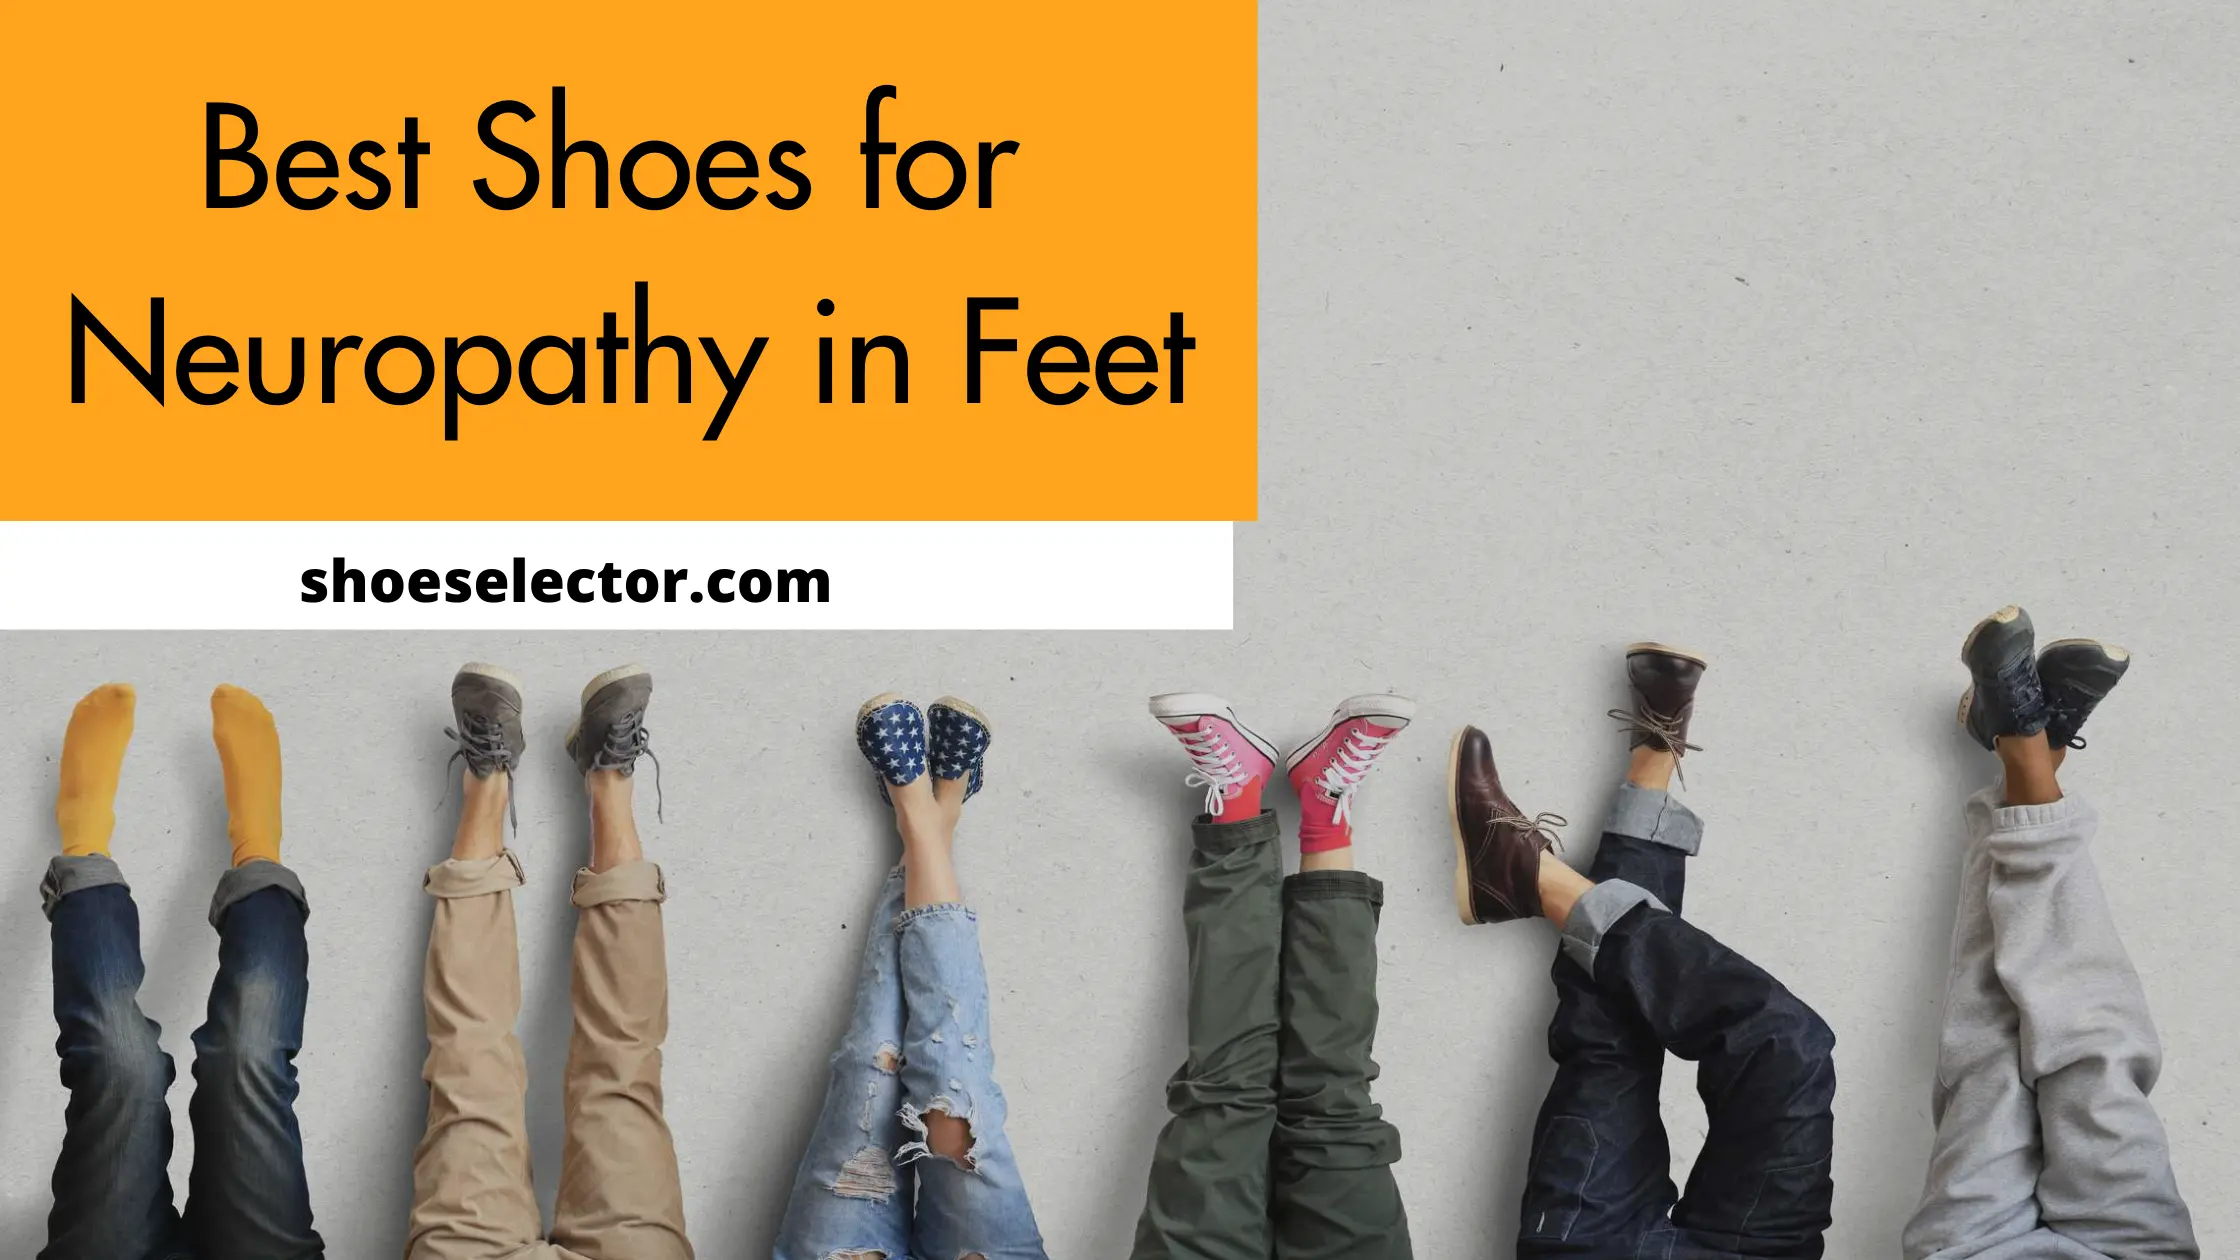 Best Shoes For Neuropathy in Feet - Comprehensive Guide